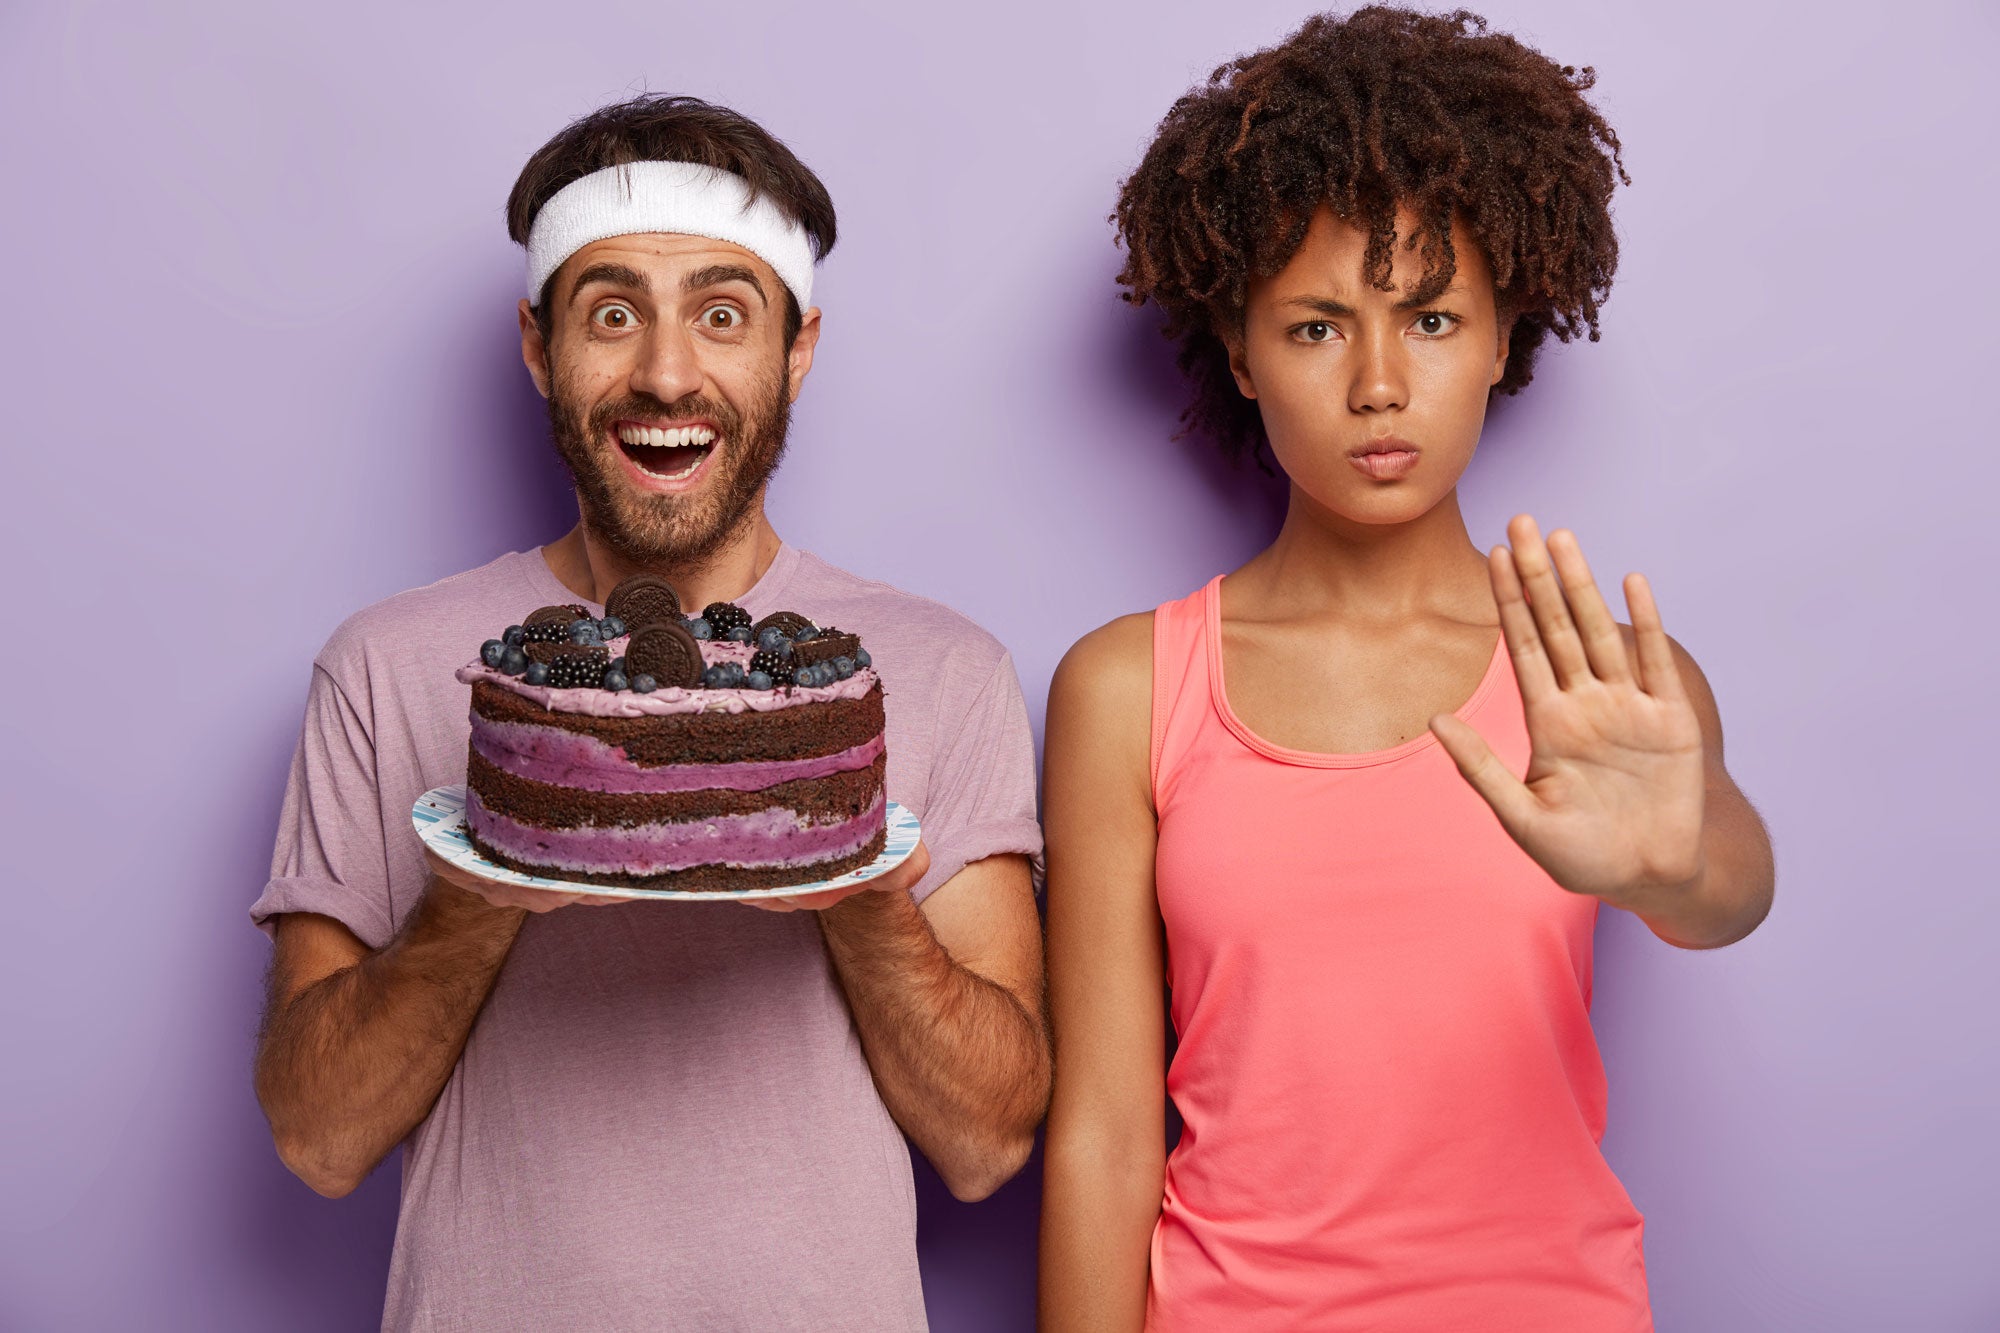 Image of a super thrilled man wearing a sports headband holding a 4-pound cake. Beside is a woman with a concerned face and a stop hand gesture. They are standing against a light purple background.